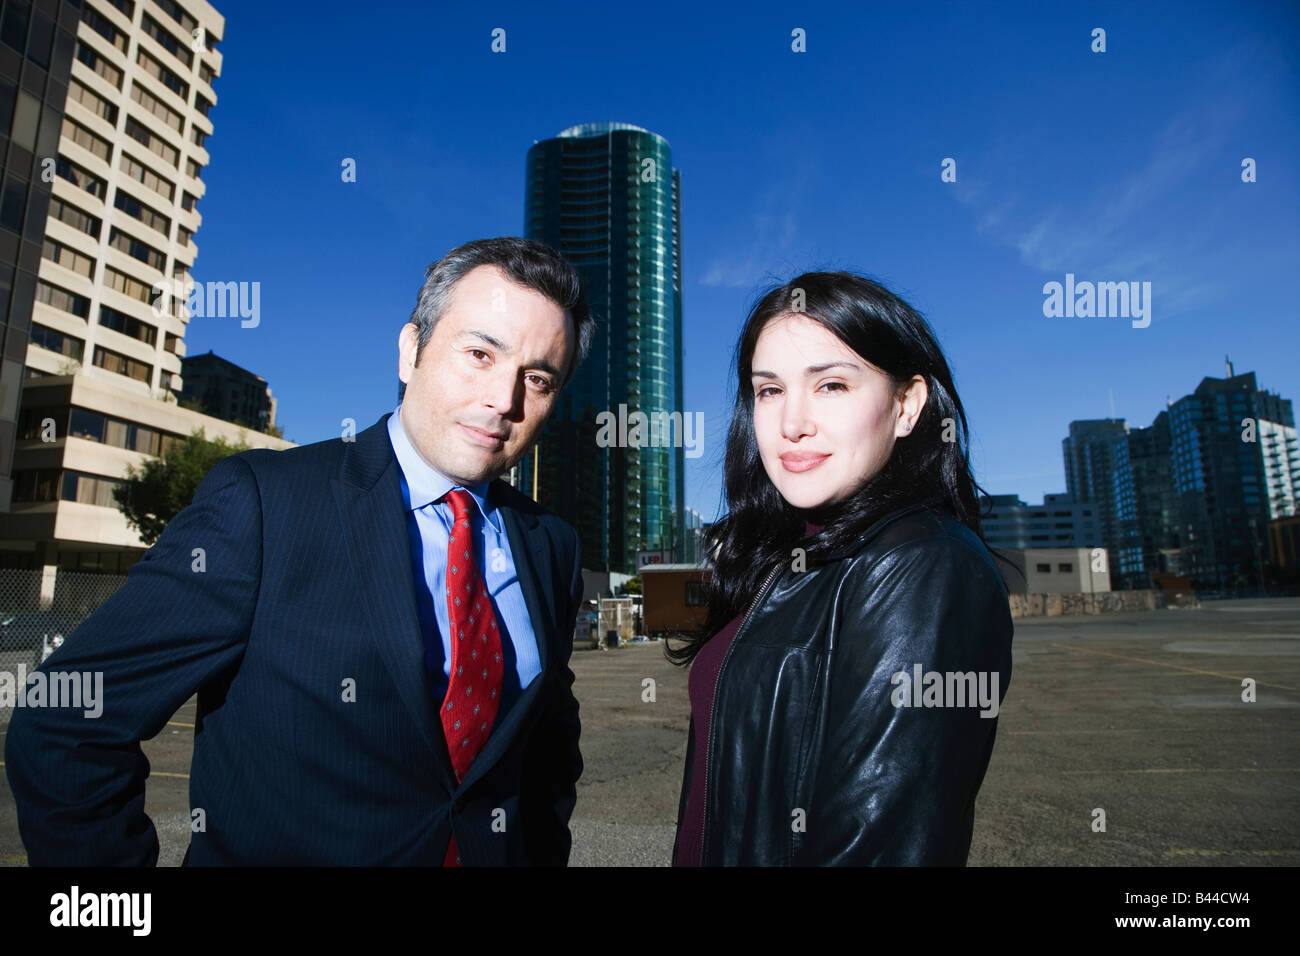 Hispanic businesspeople in front of high-rises Stock Photo